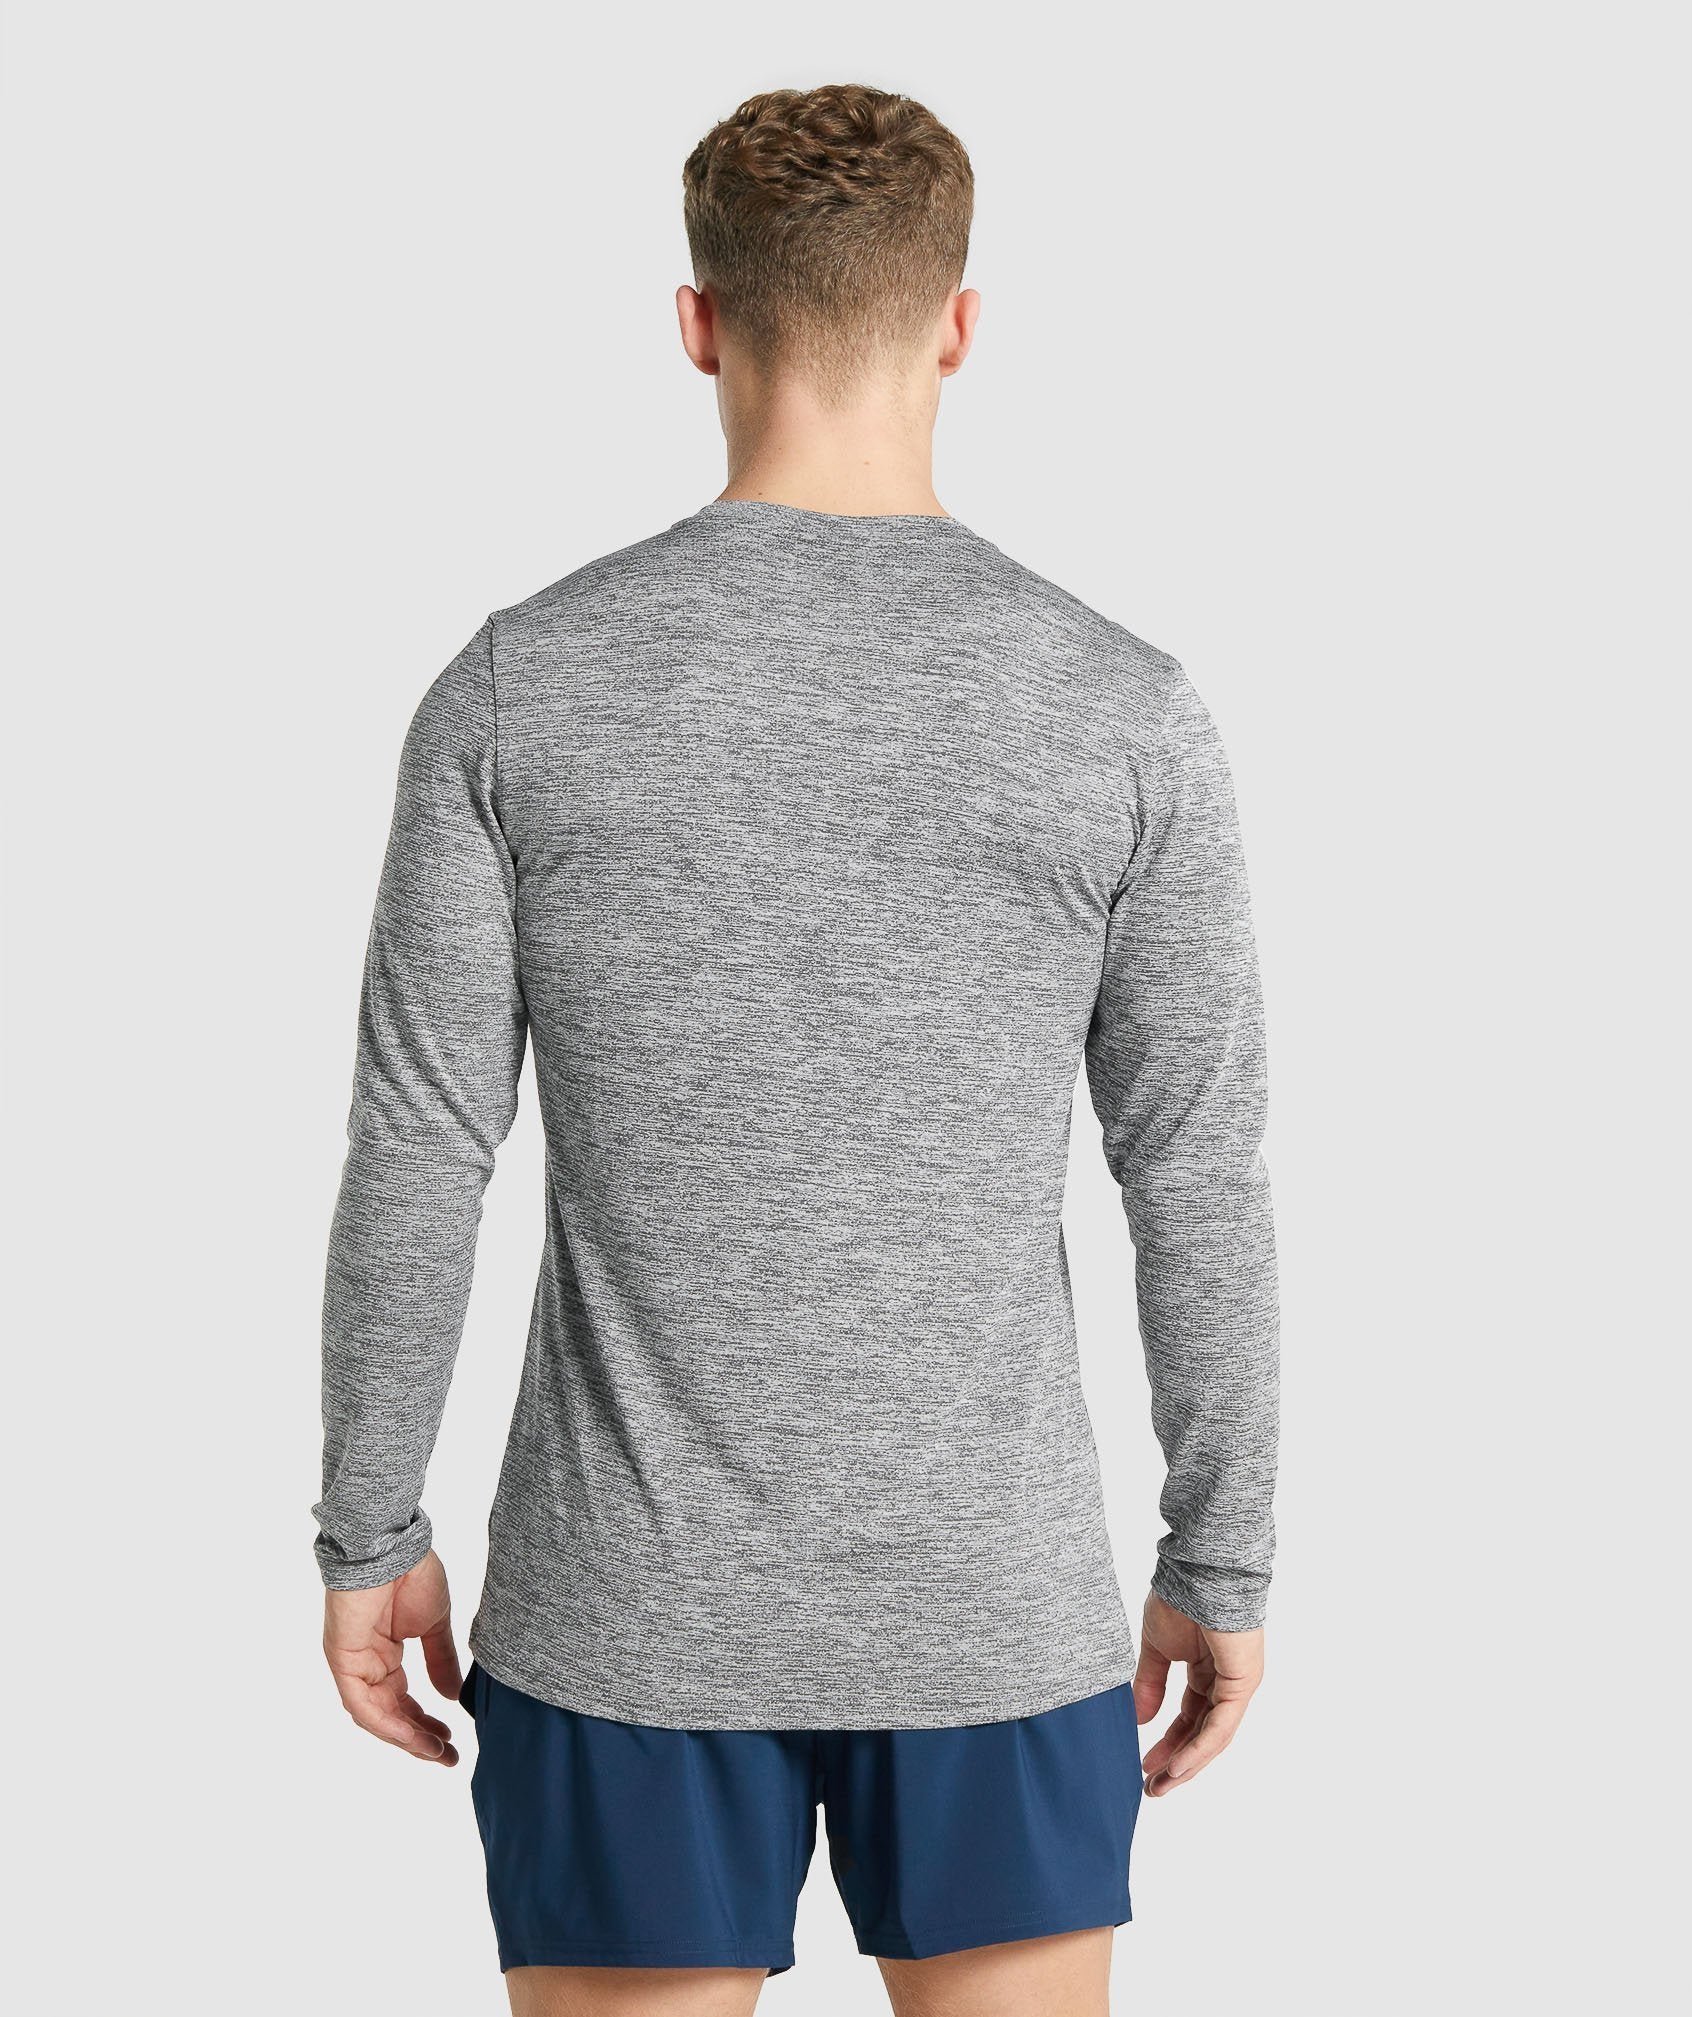 Arrival Marl Long Sleeve T-Shirt in Charcoal Marl - view 2